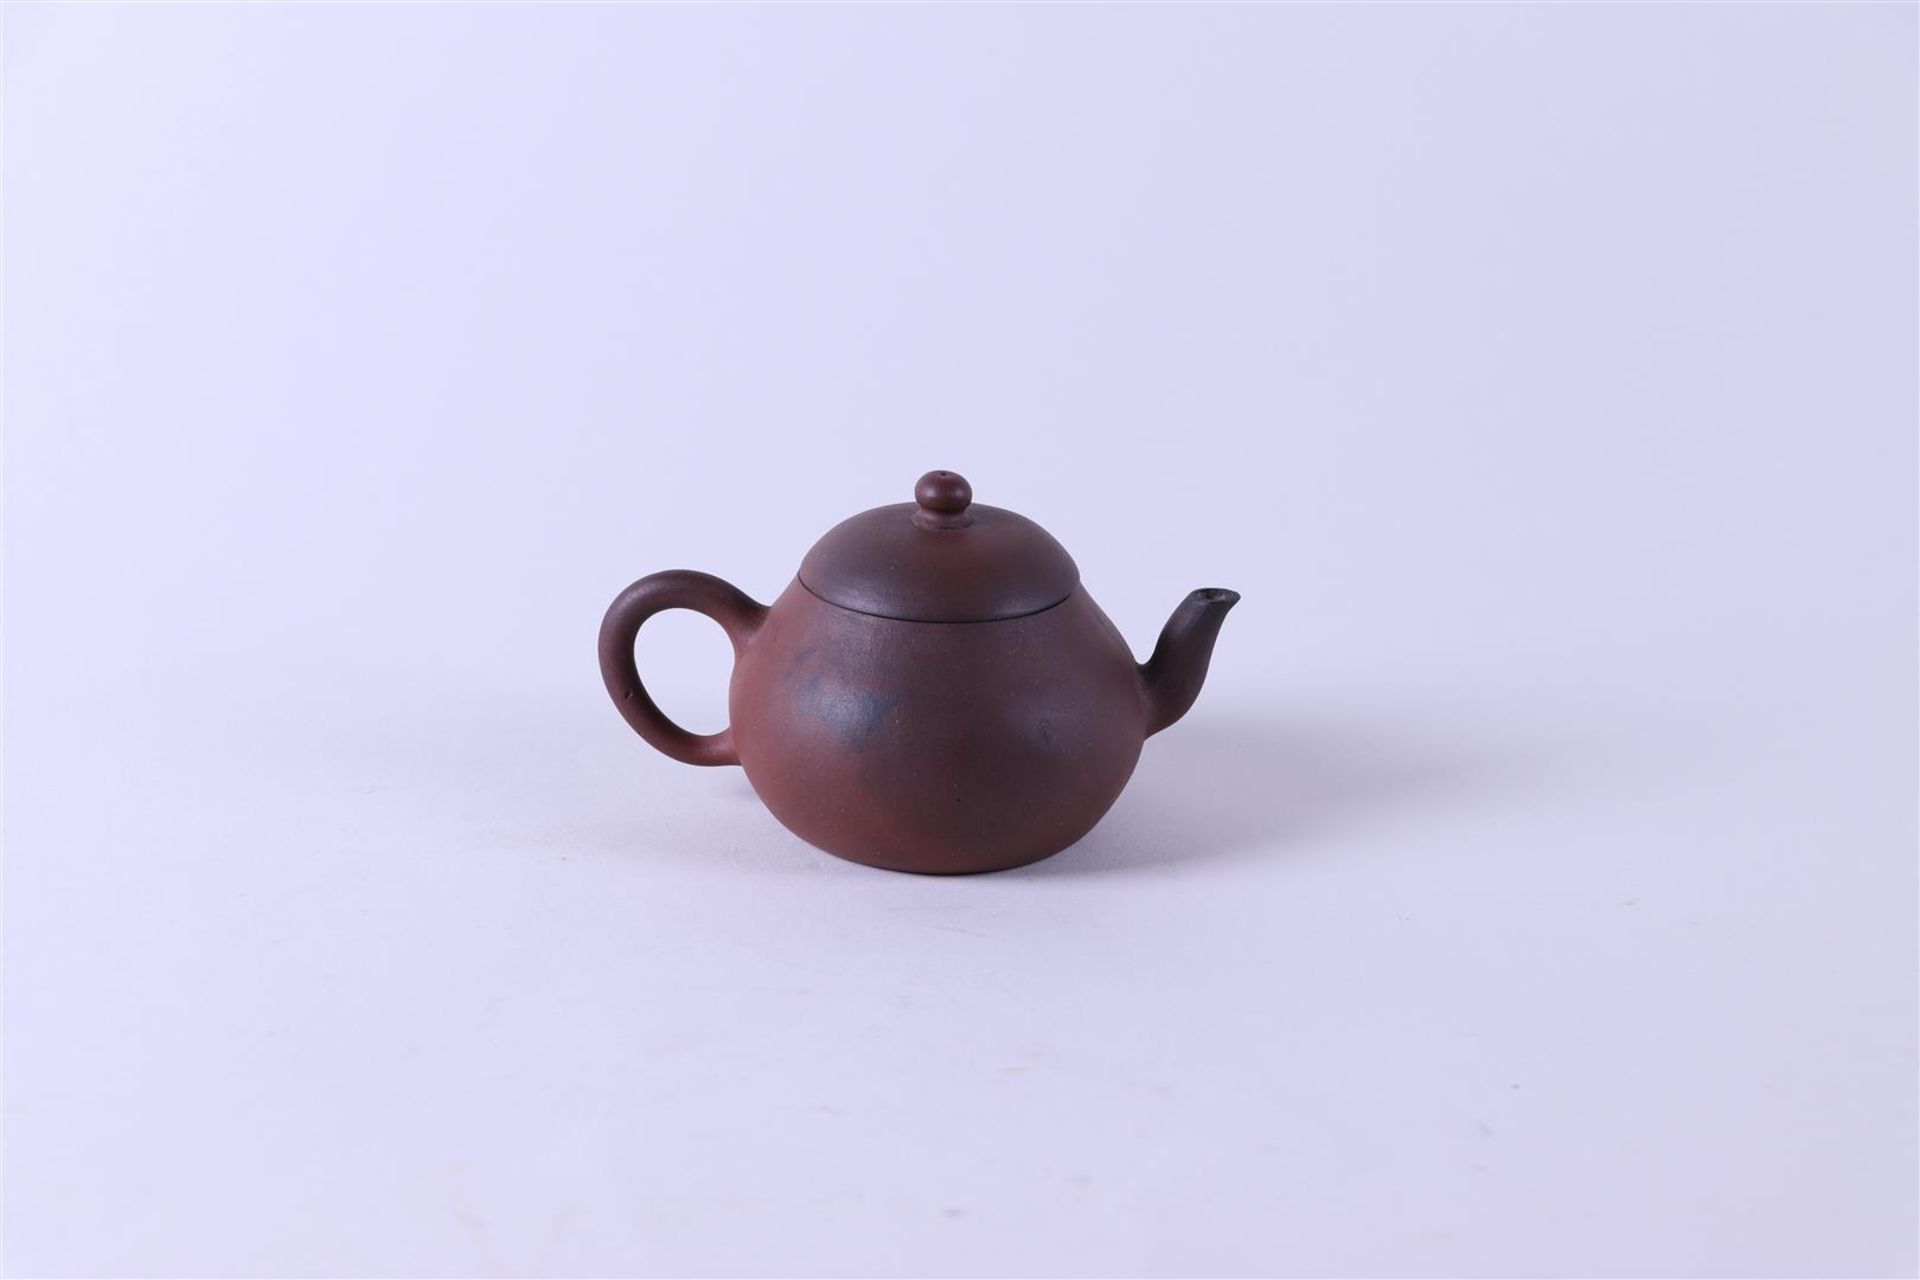 A Yixing teapot, marked on the bottom. China, 19th century.